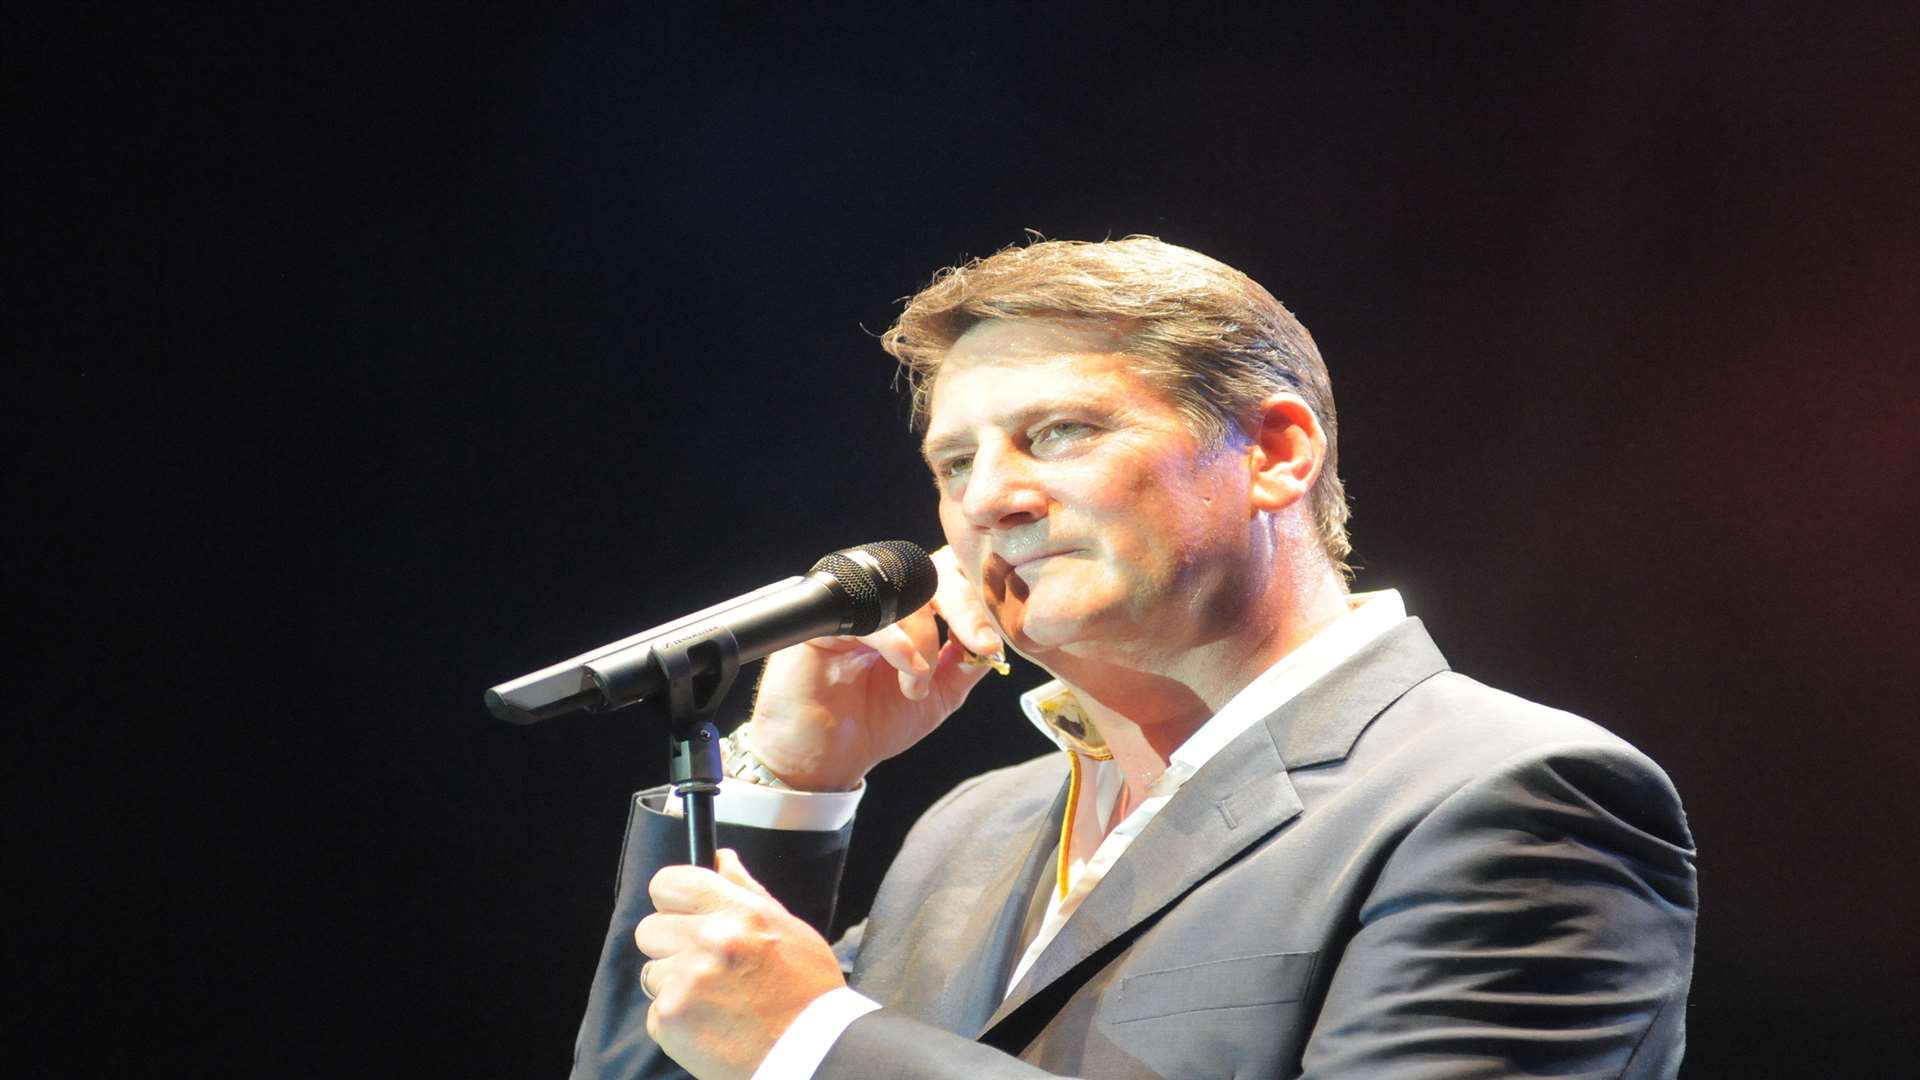 Tony Hadley performed at last year's ladies' lunch